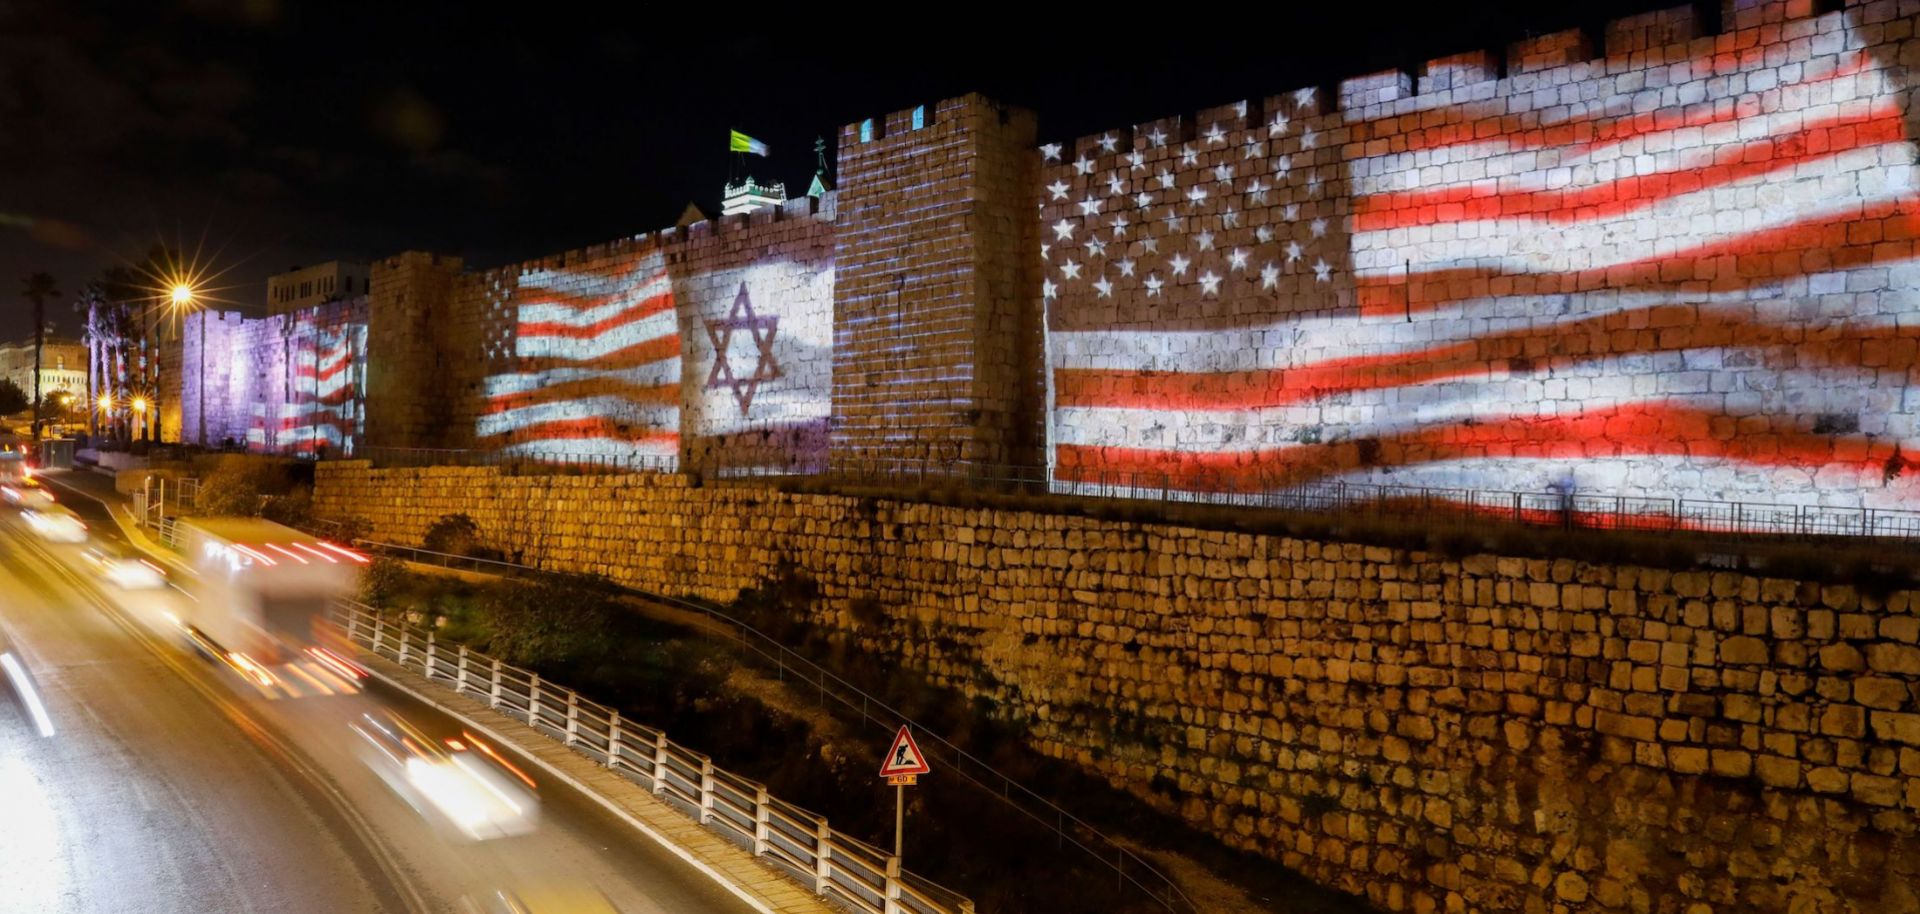 The Israeli and U.S. flags are projected on the walls of Jerusalem's Old City in celebration of the two countries’ close ties on Feb. 11, 2020.